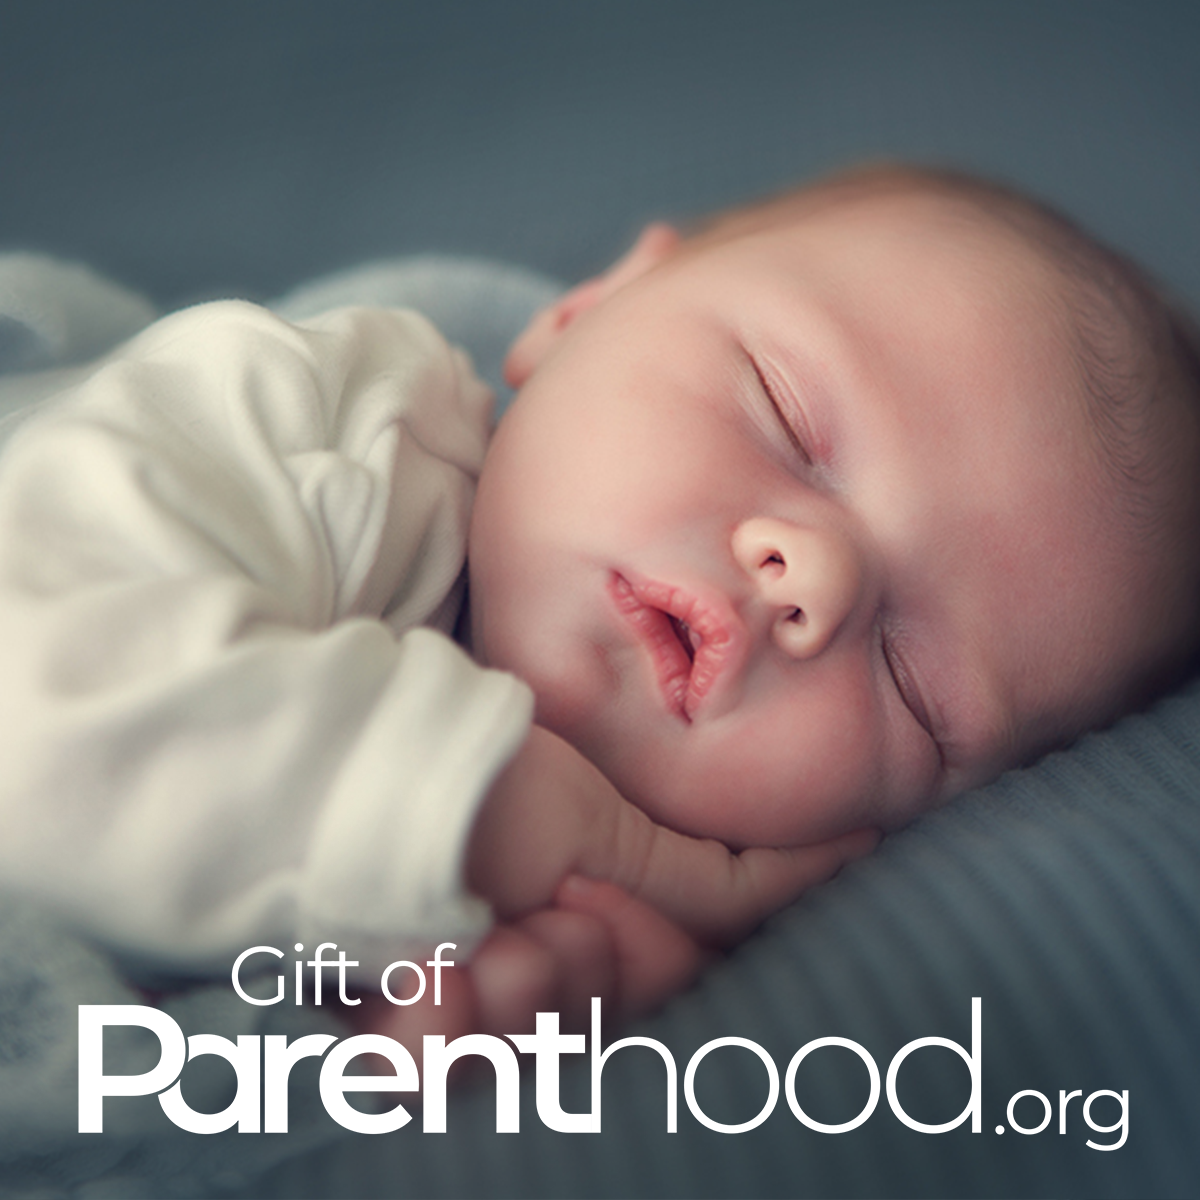 gift of parenthood referral code